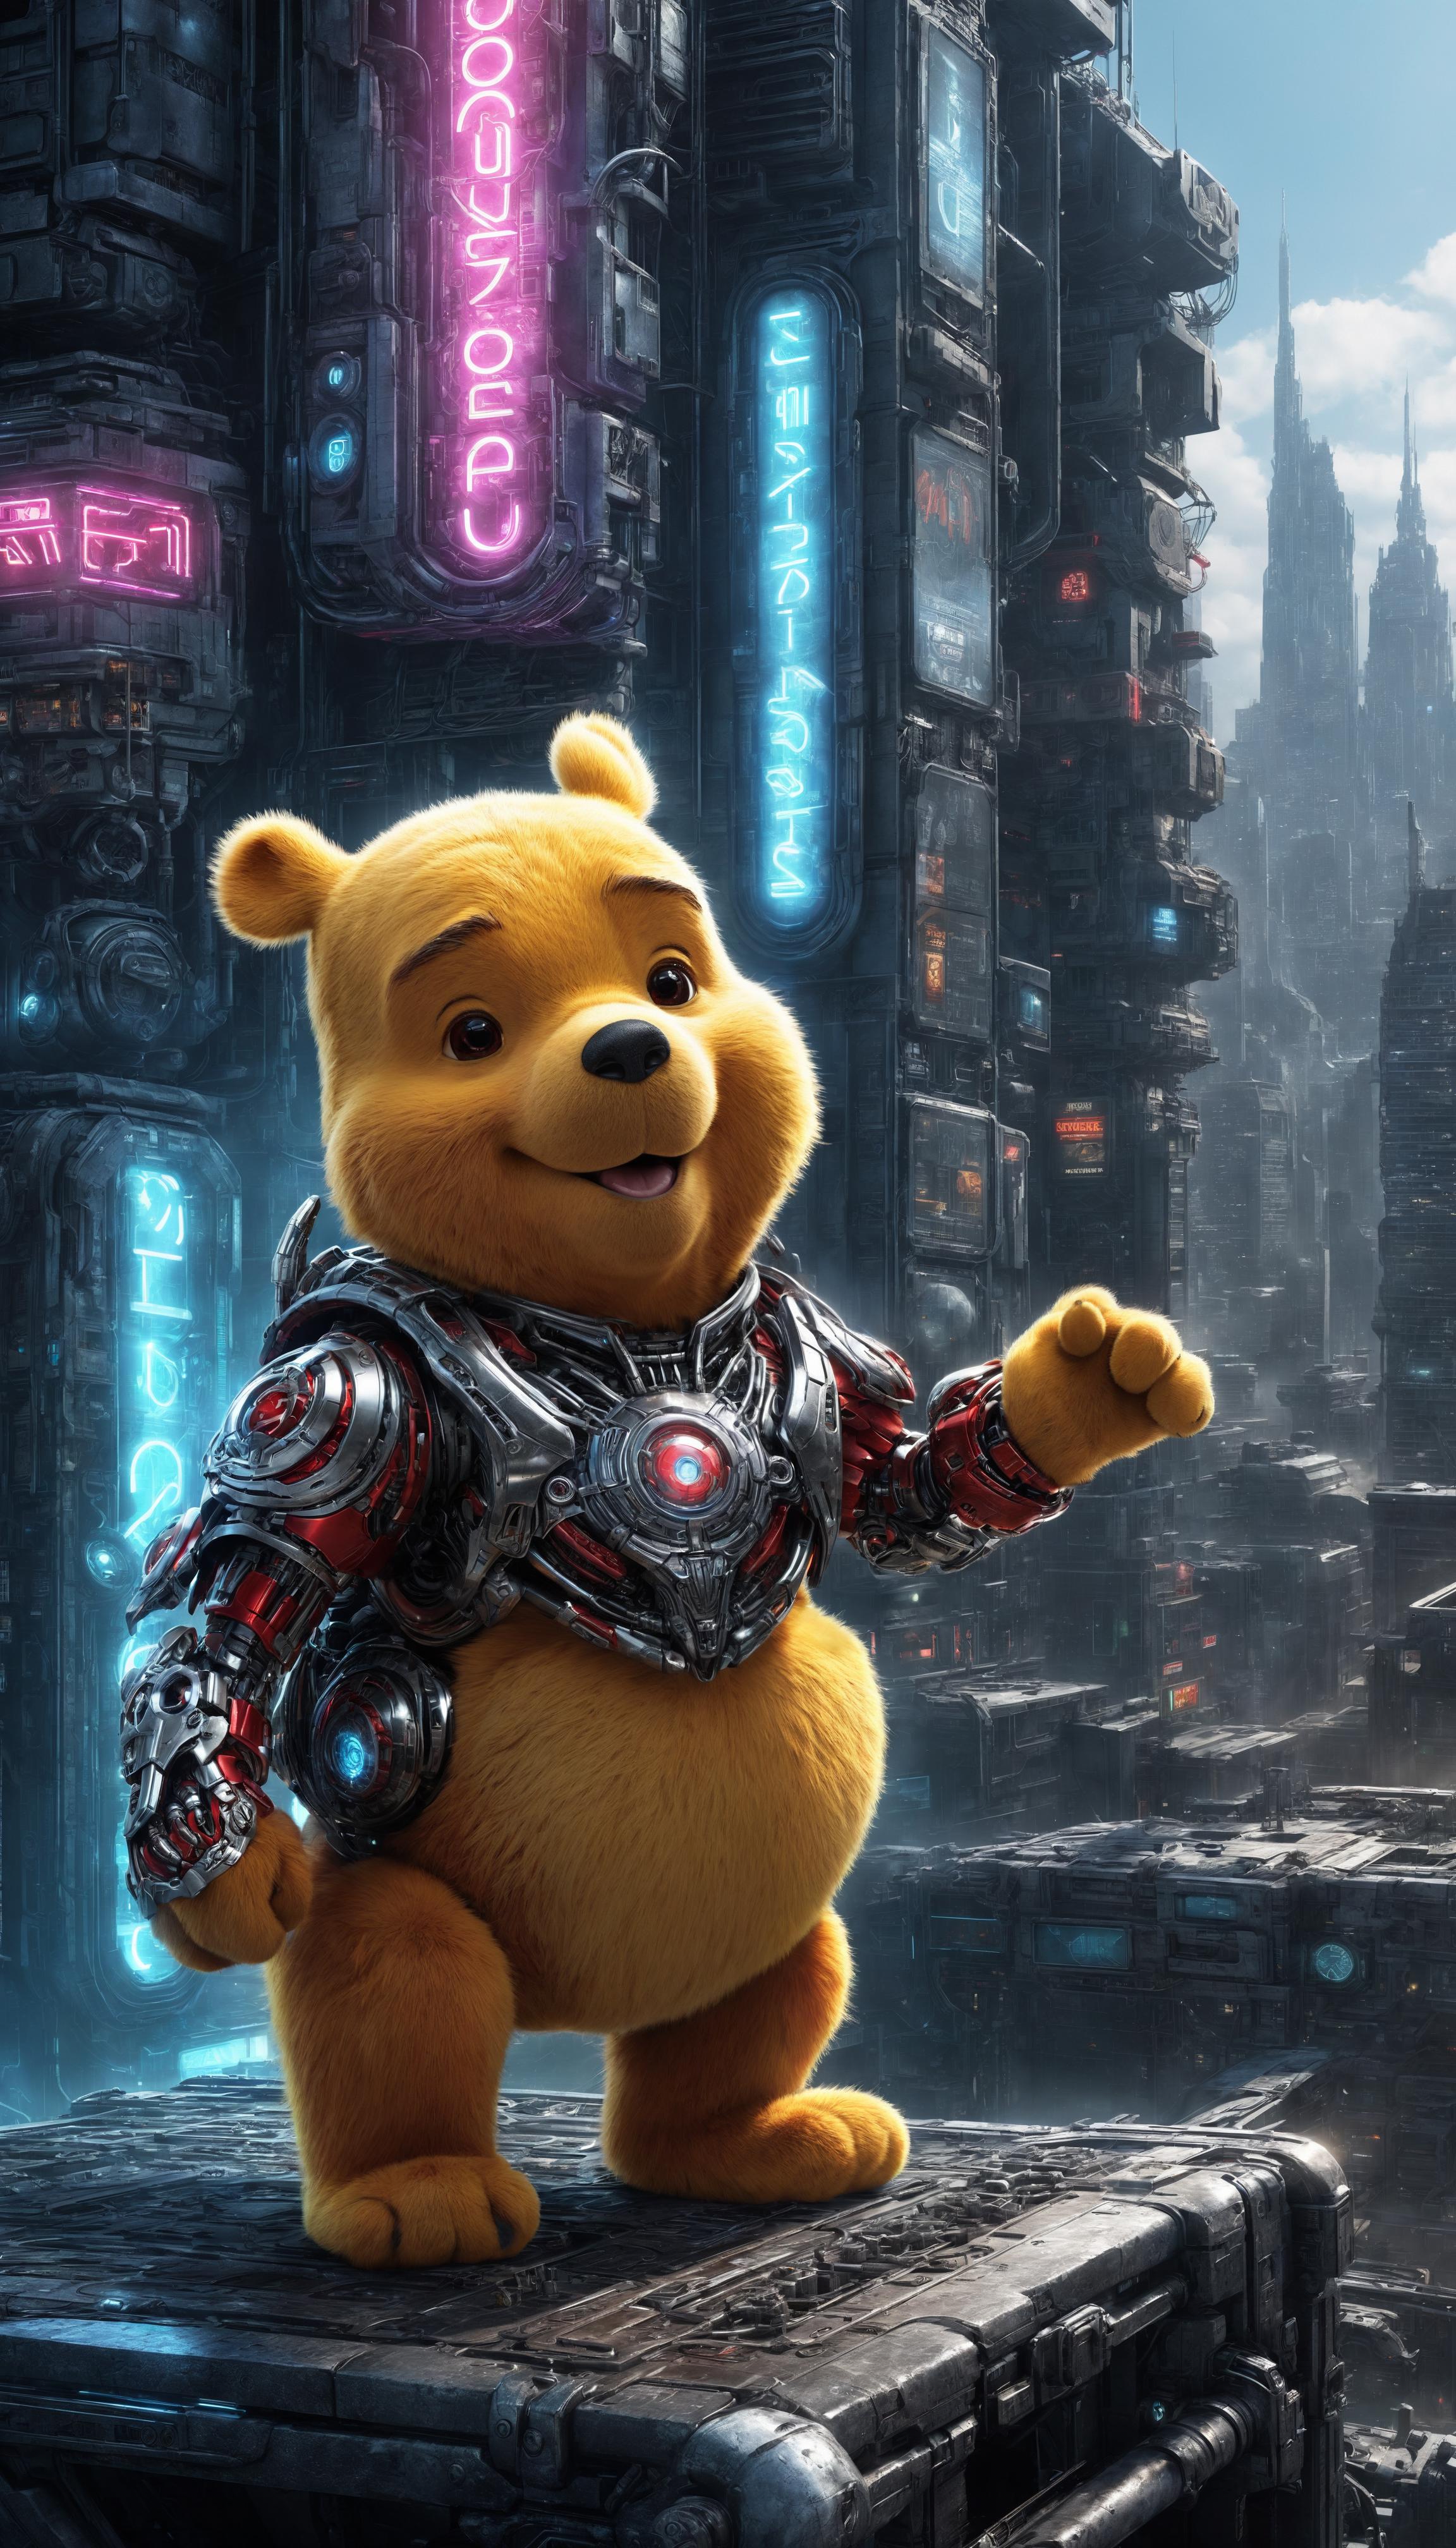 A cartoon yellow teddy bear wearing a silver space suit.